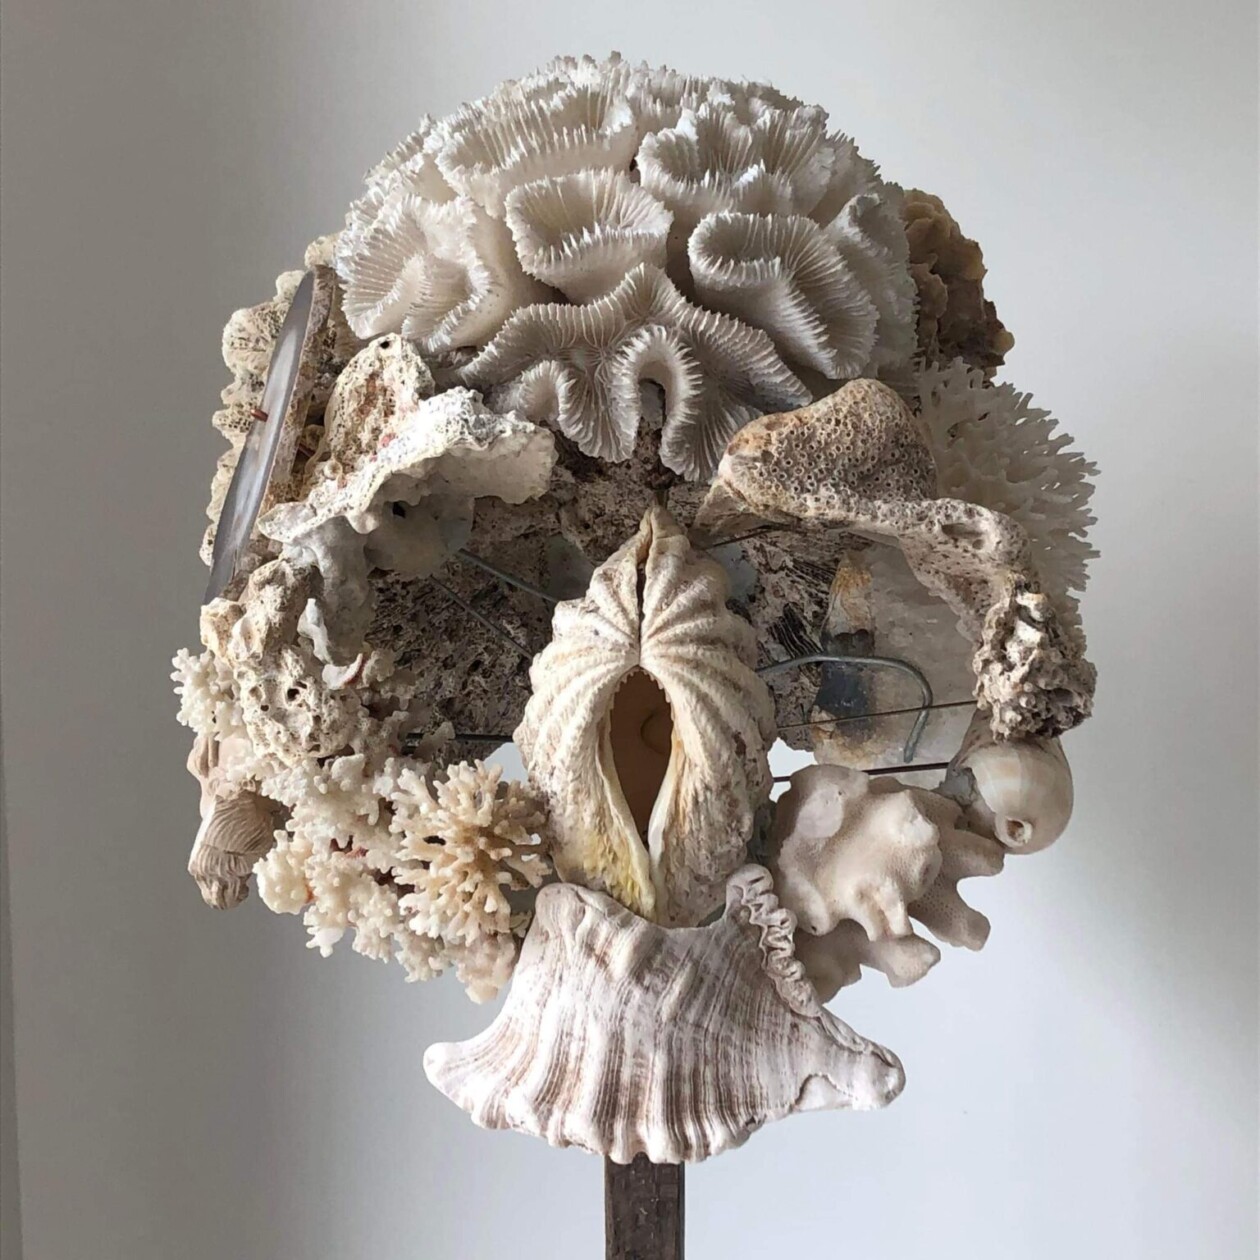 Sculptures Of Anatomical Details Made From Found Coral And Shells By Gregory Halili (10)